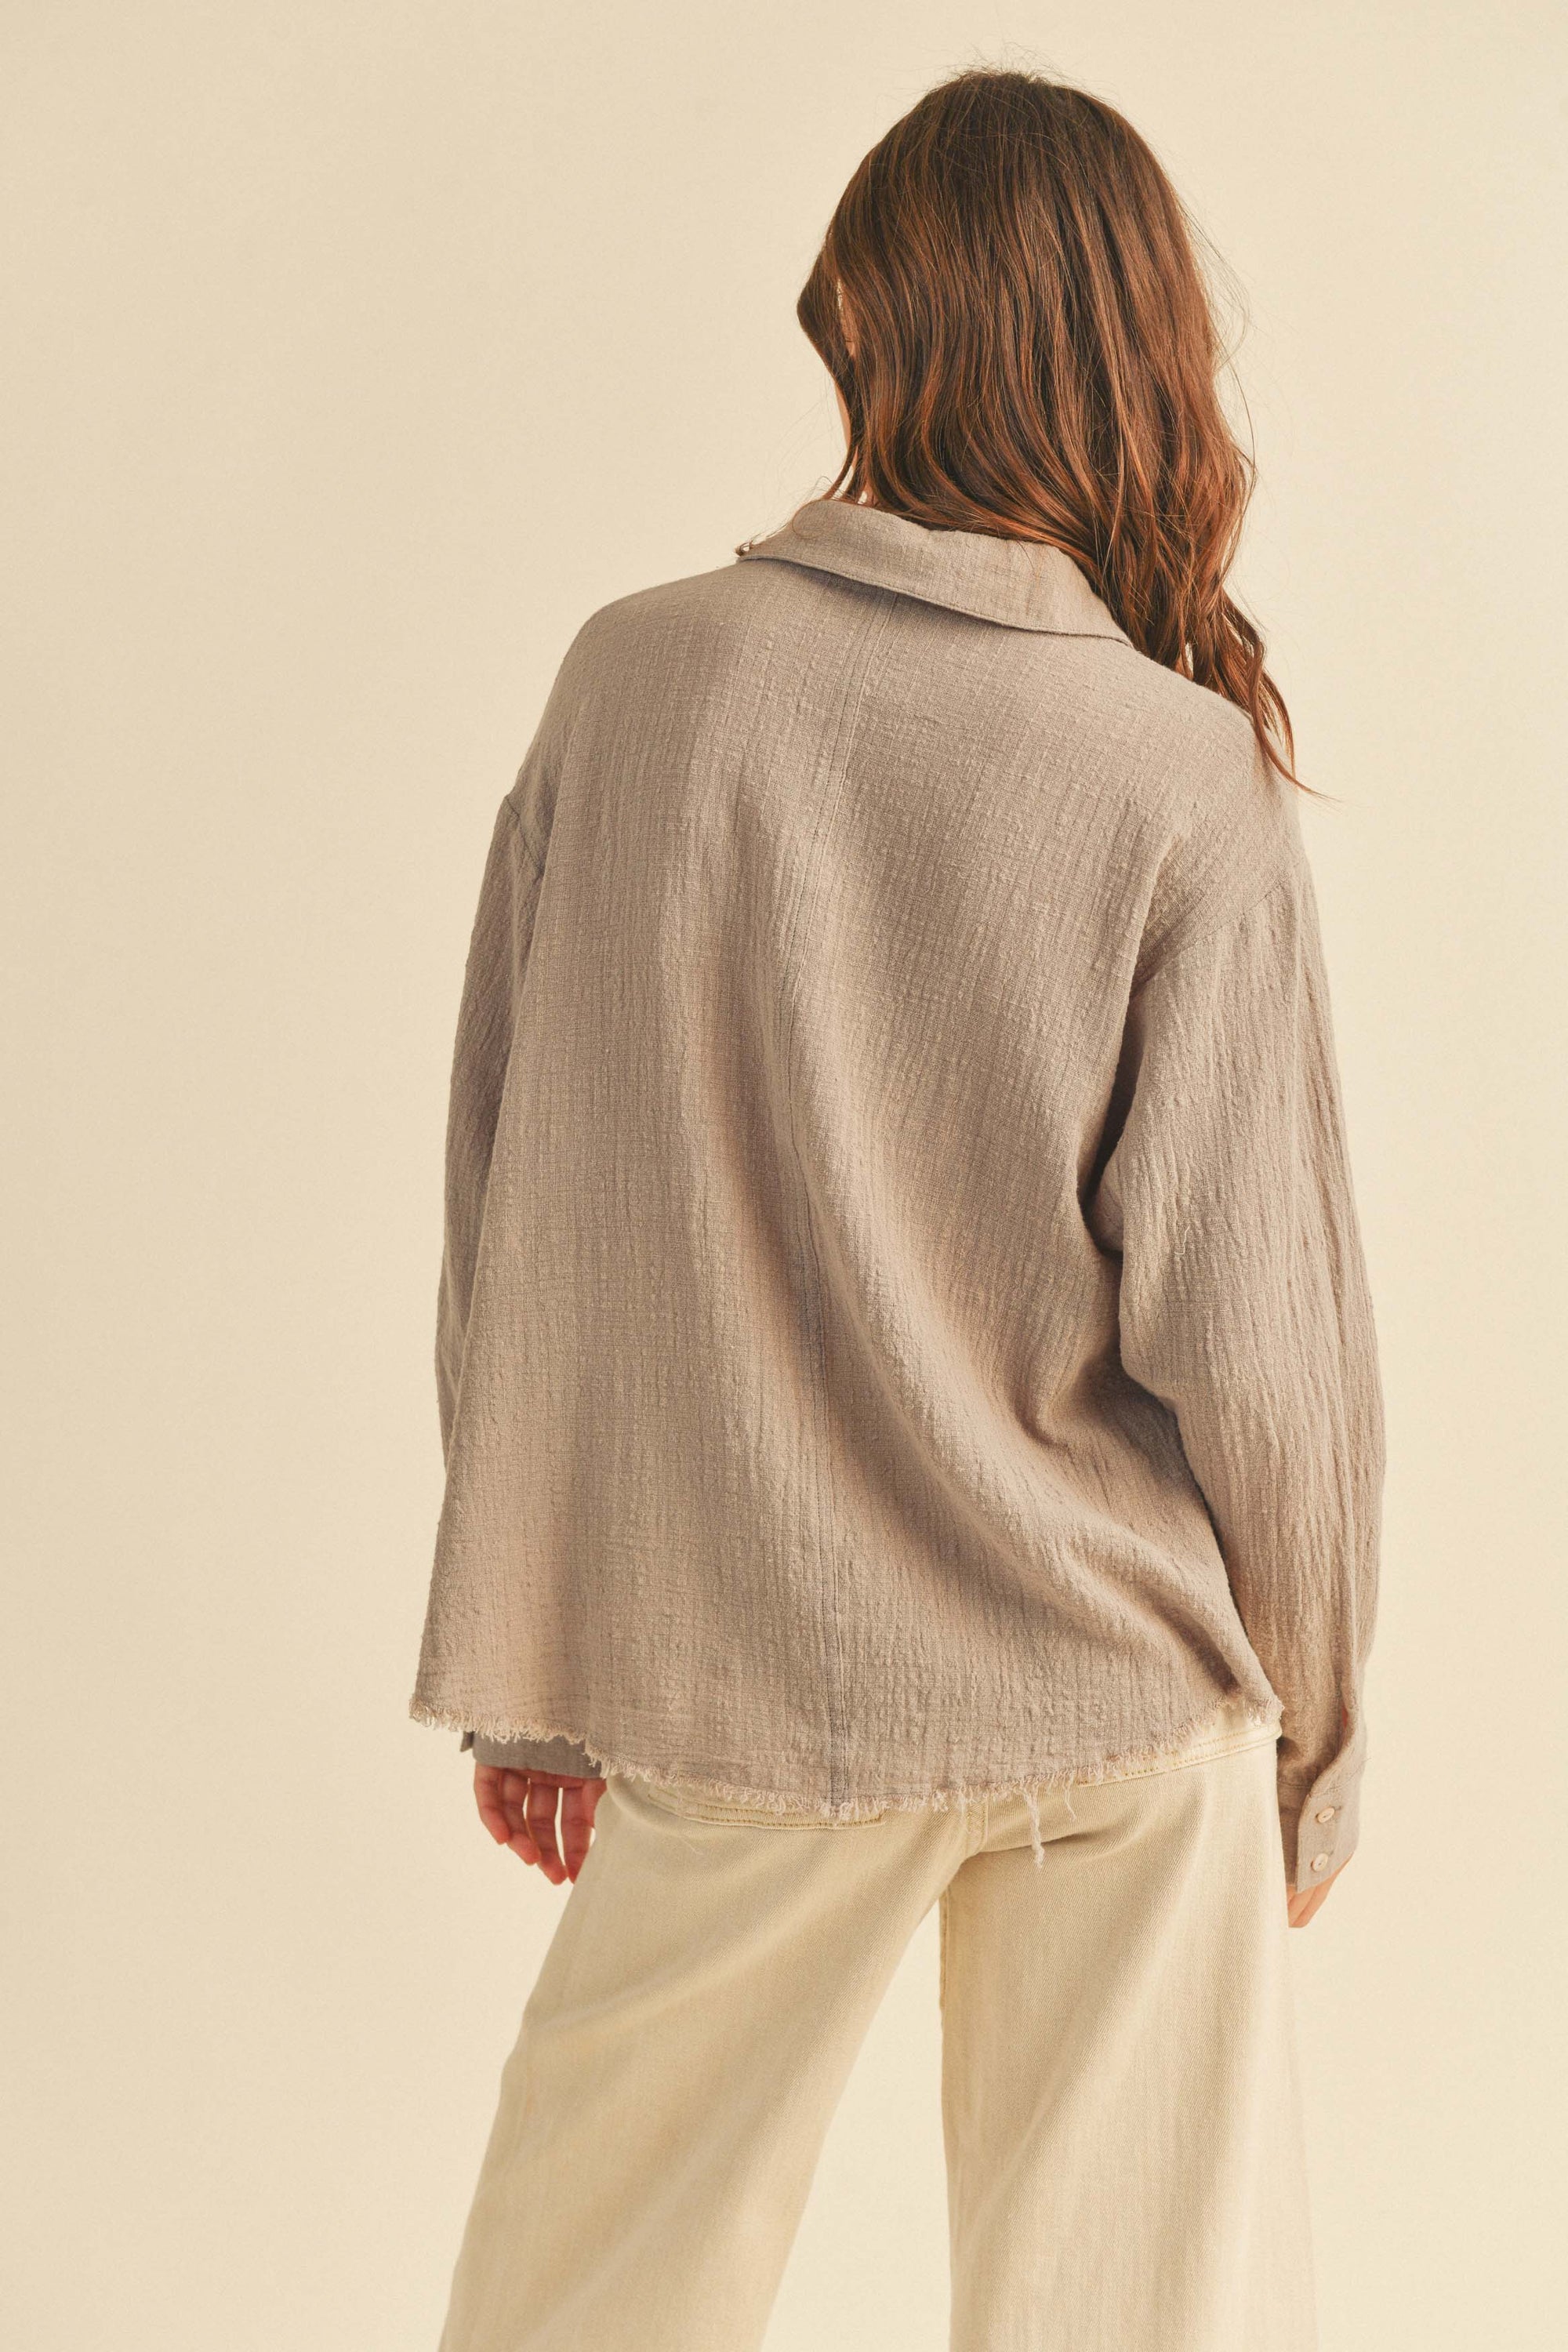 The Bayley Gauze Button Down Top